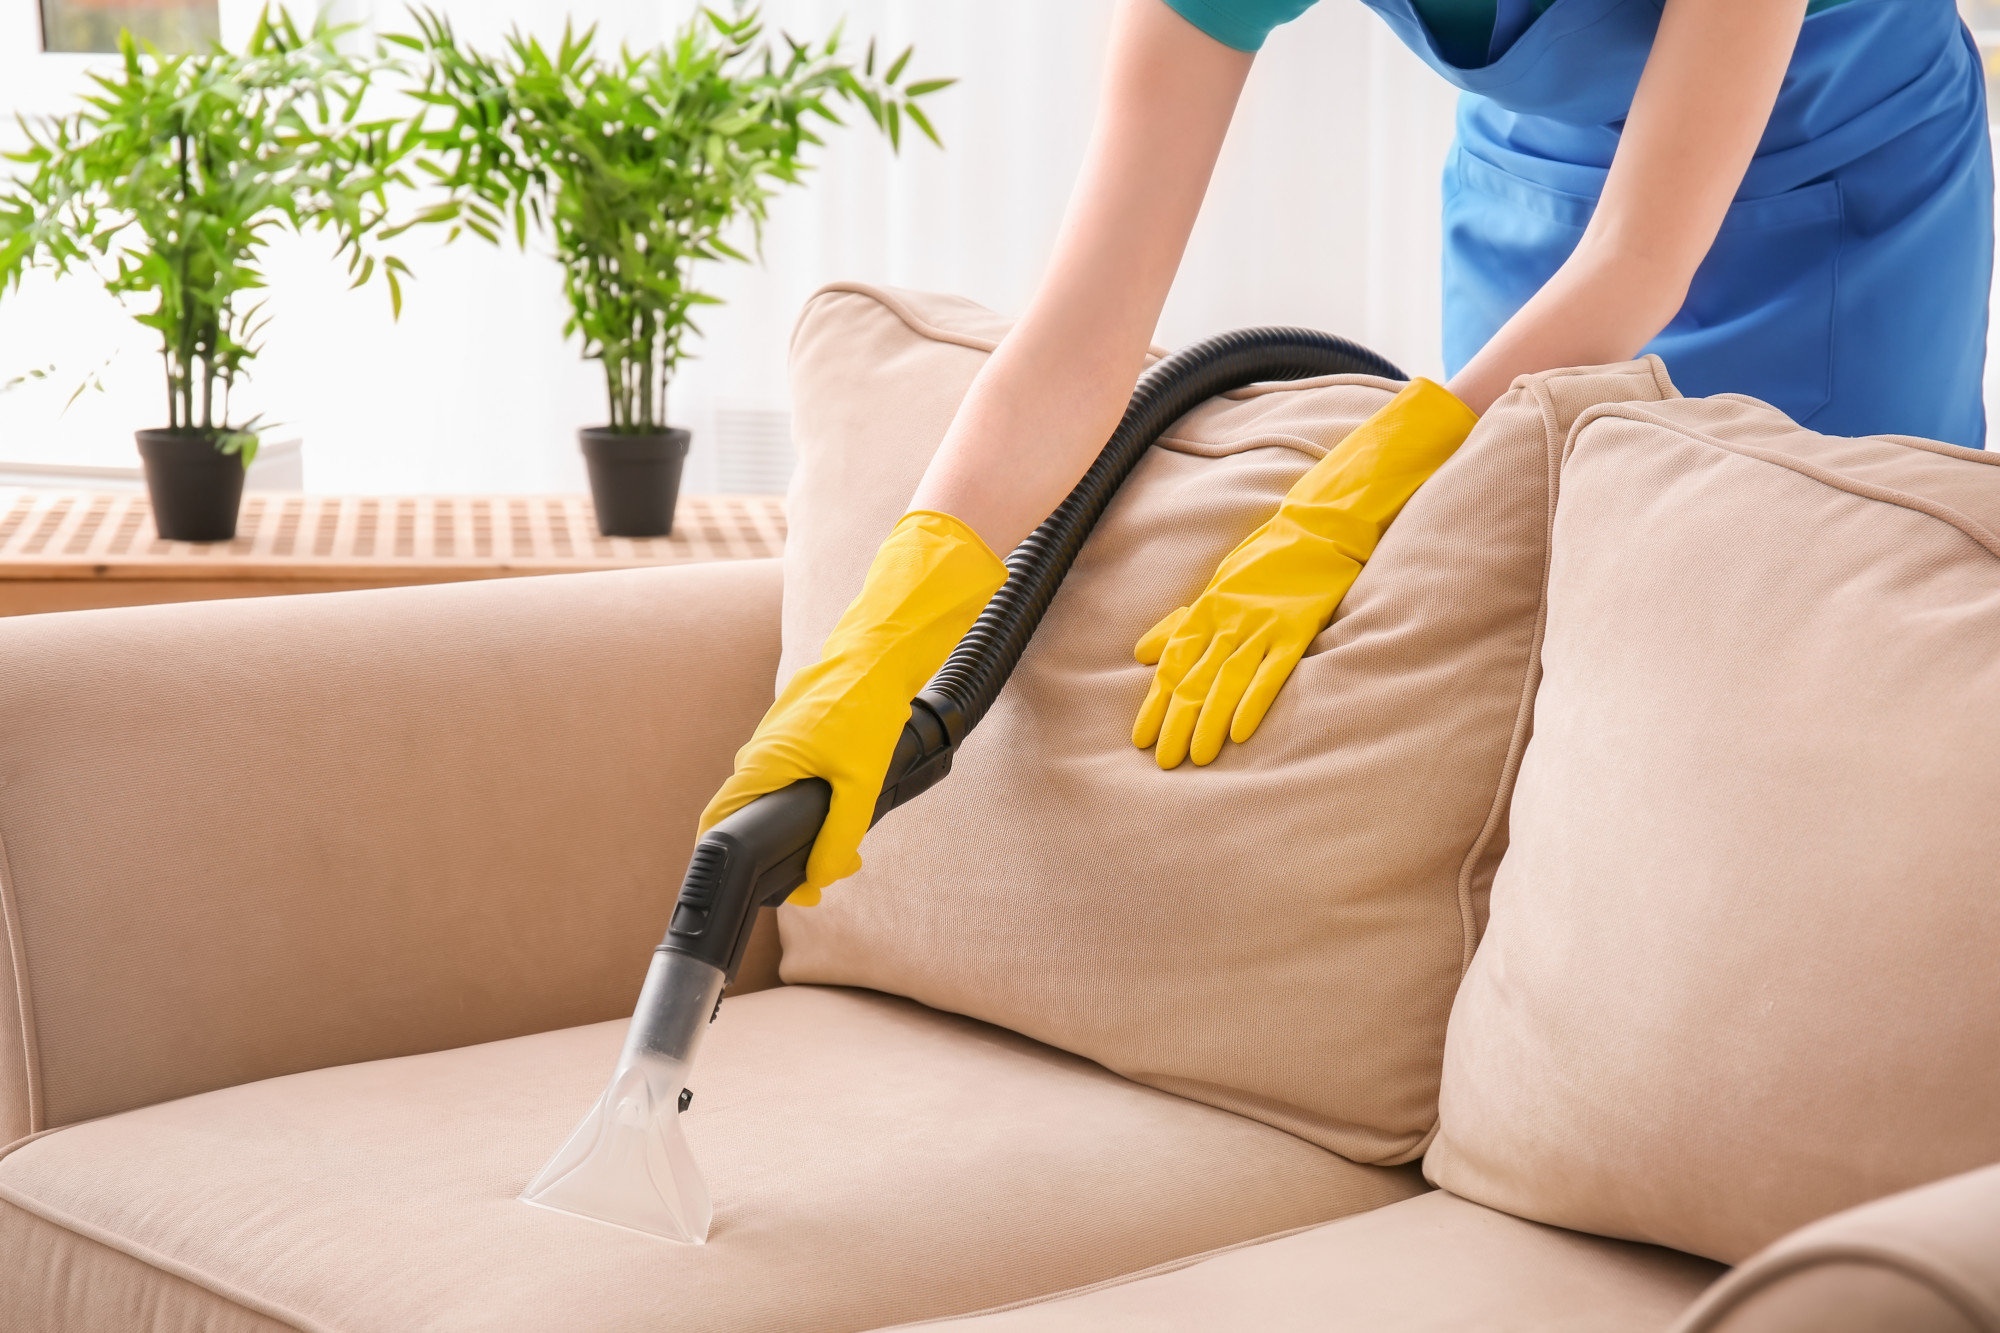 Top 5 Upholstery Cleaning Tips to Keep Your Furniture Fresh | Blue Jay Carpet Cleaning | Professional Carpet Cleaners Flower Mound | Lewisville | Grapevine | Coppell